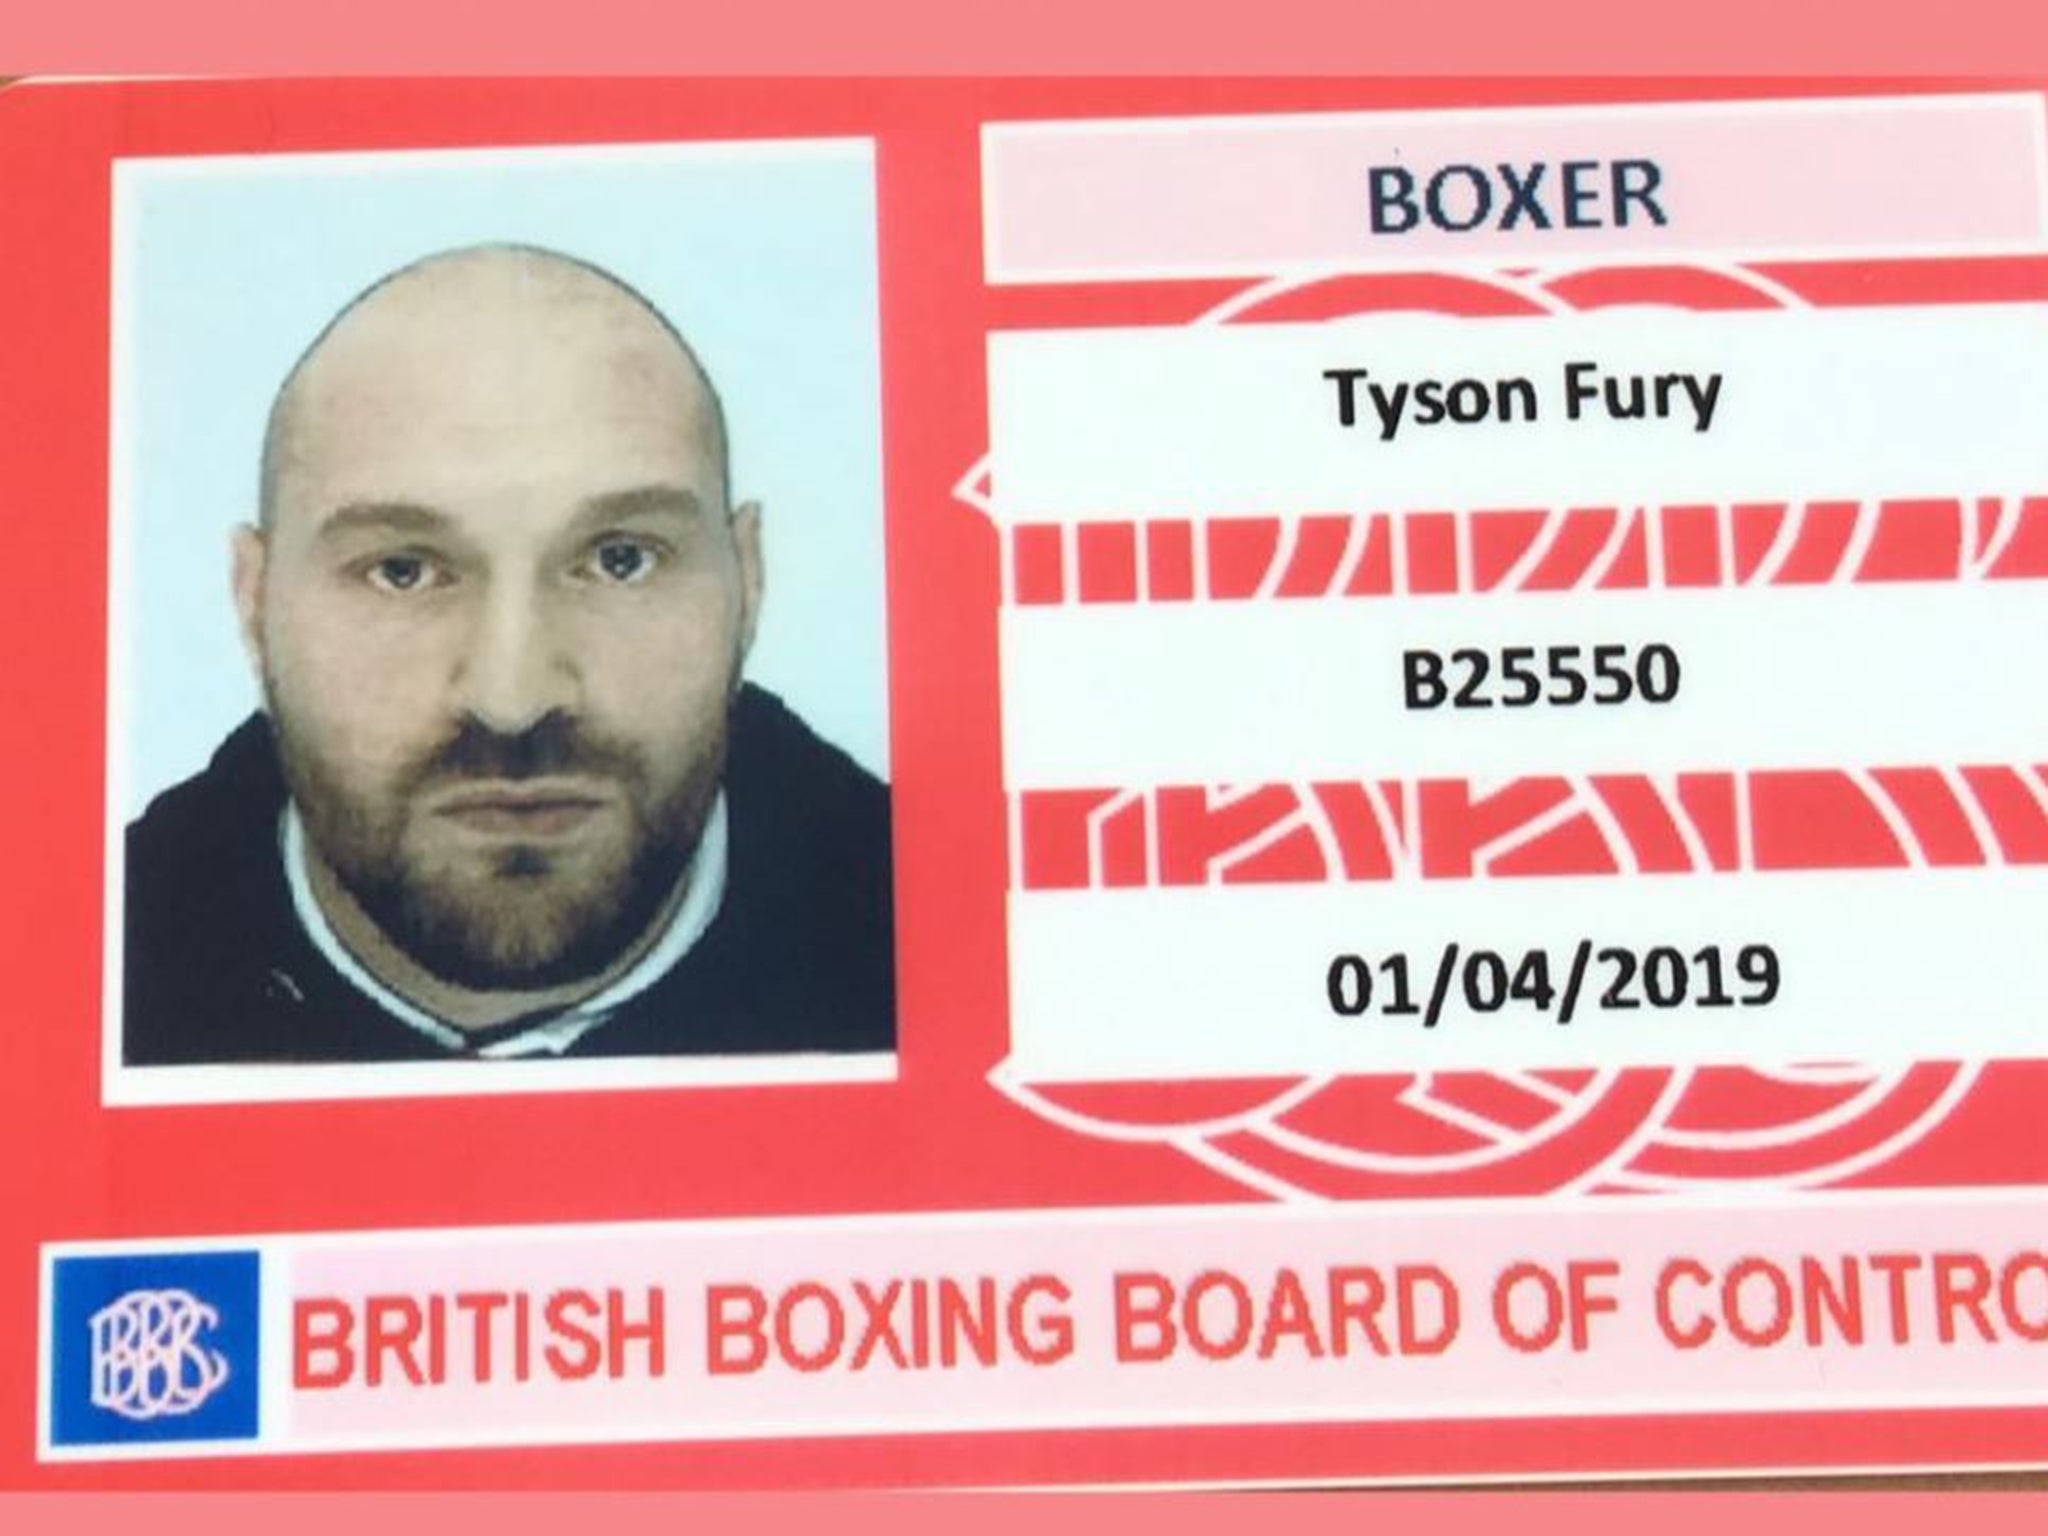 Tyson Fury has been granted a new boxing licence by the BBBoC